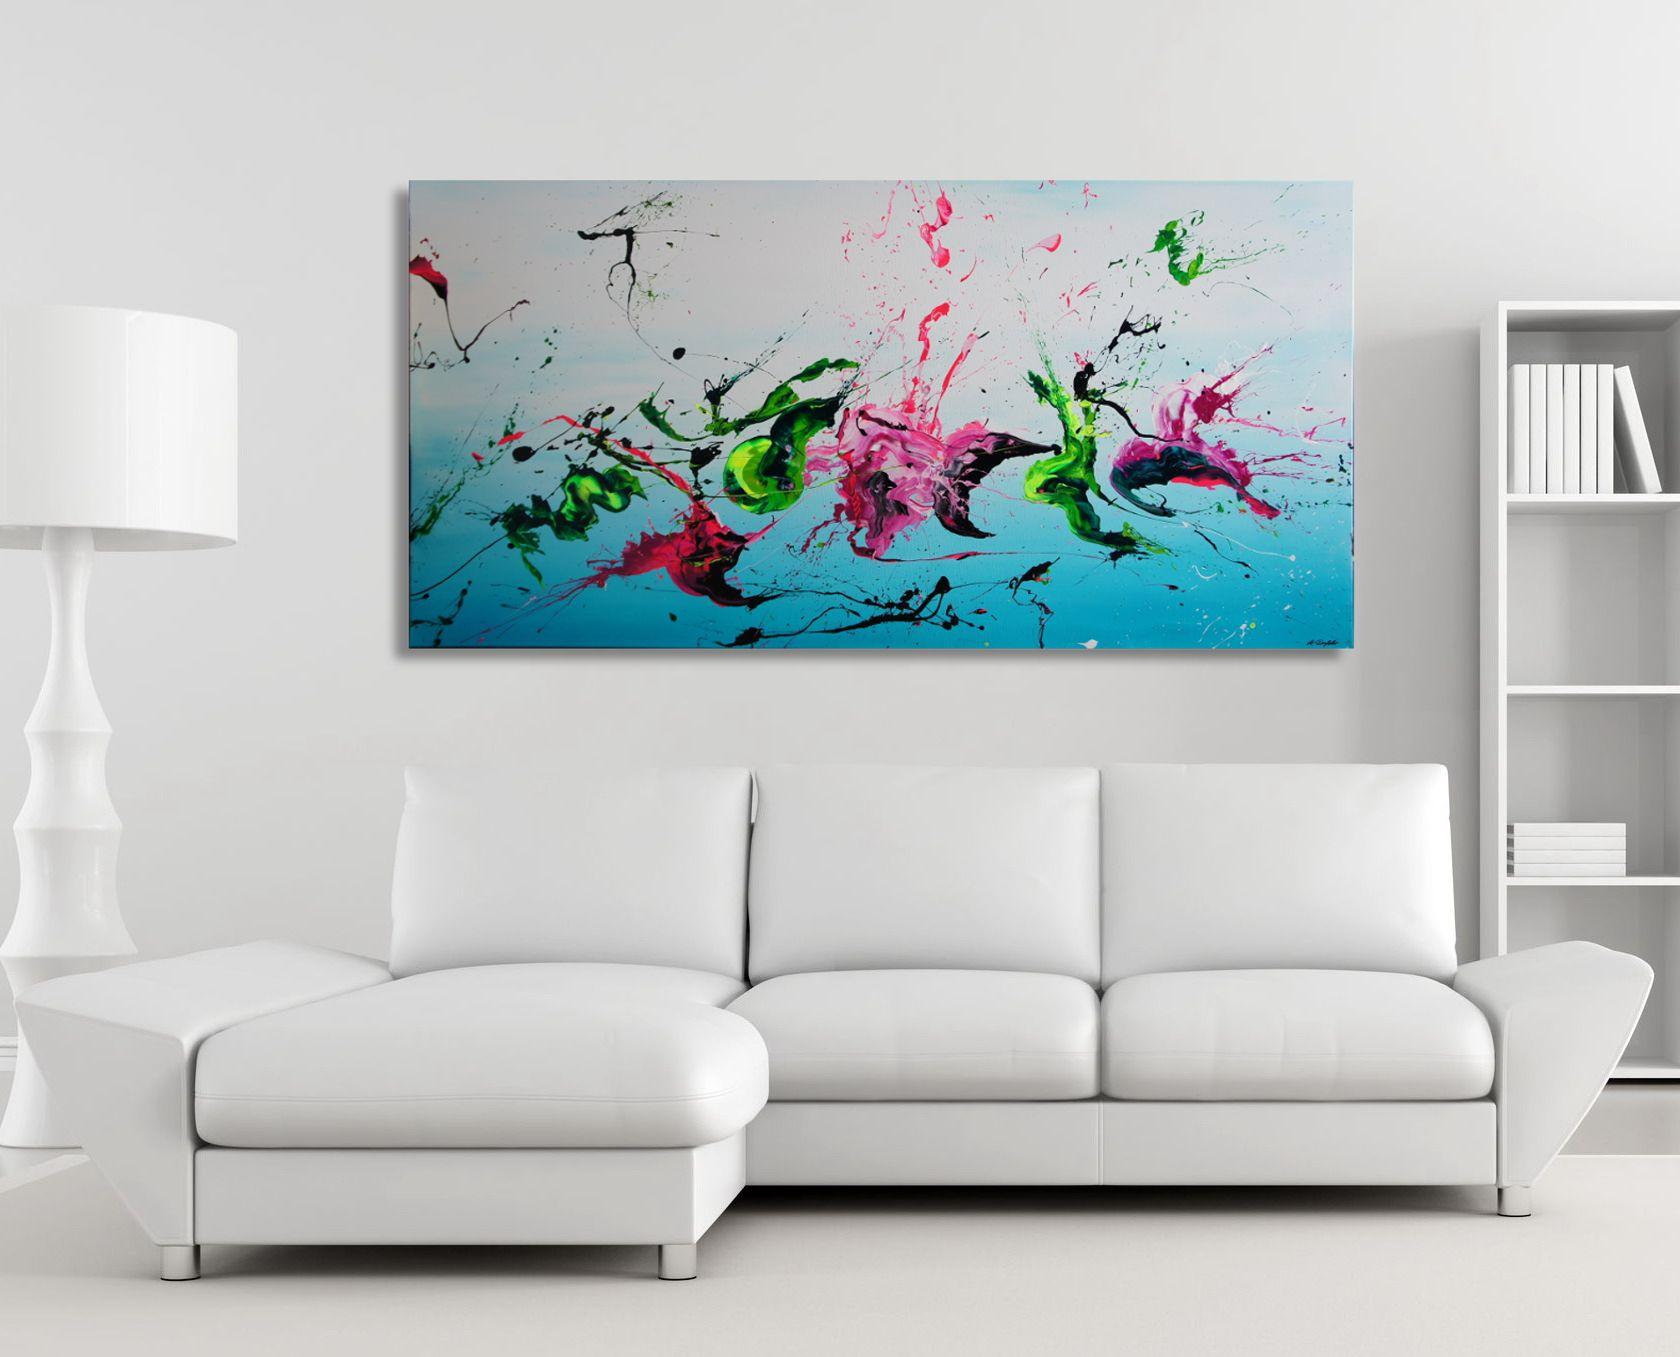 Here's a huge wide piece of the Spirits Of Skies Collection - my new signatory artwork.    This one comes with bright neon colors (orange, yellow, green, and pink) mixed with dark green, black, and white, against a distant appearing background with